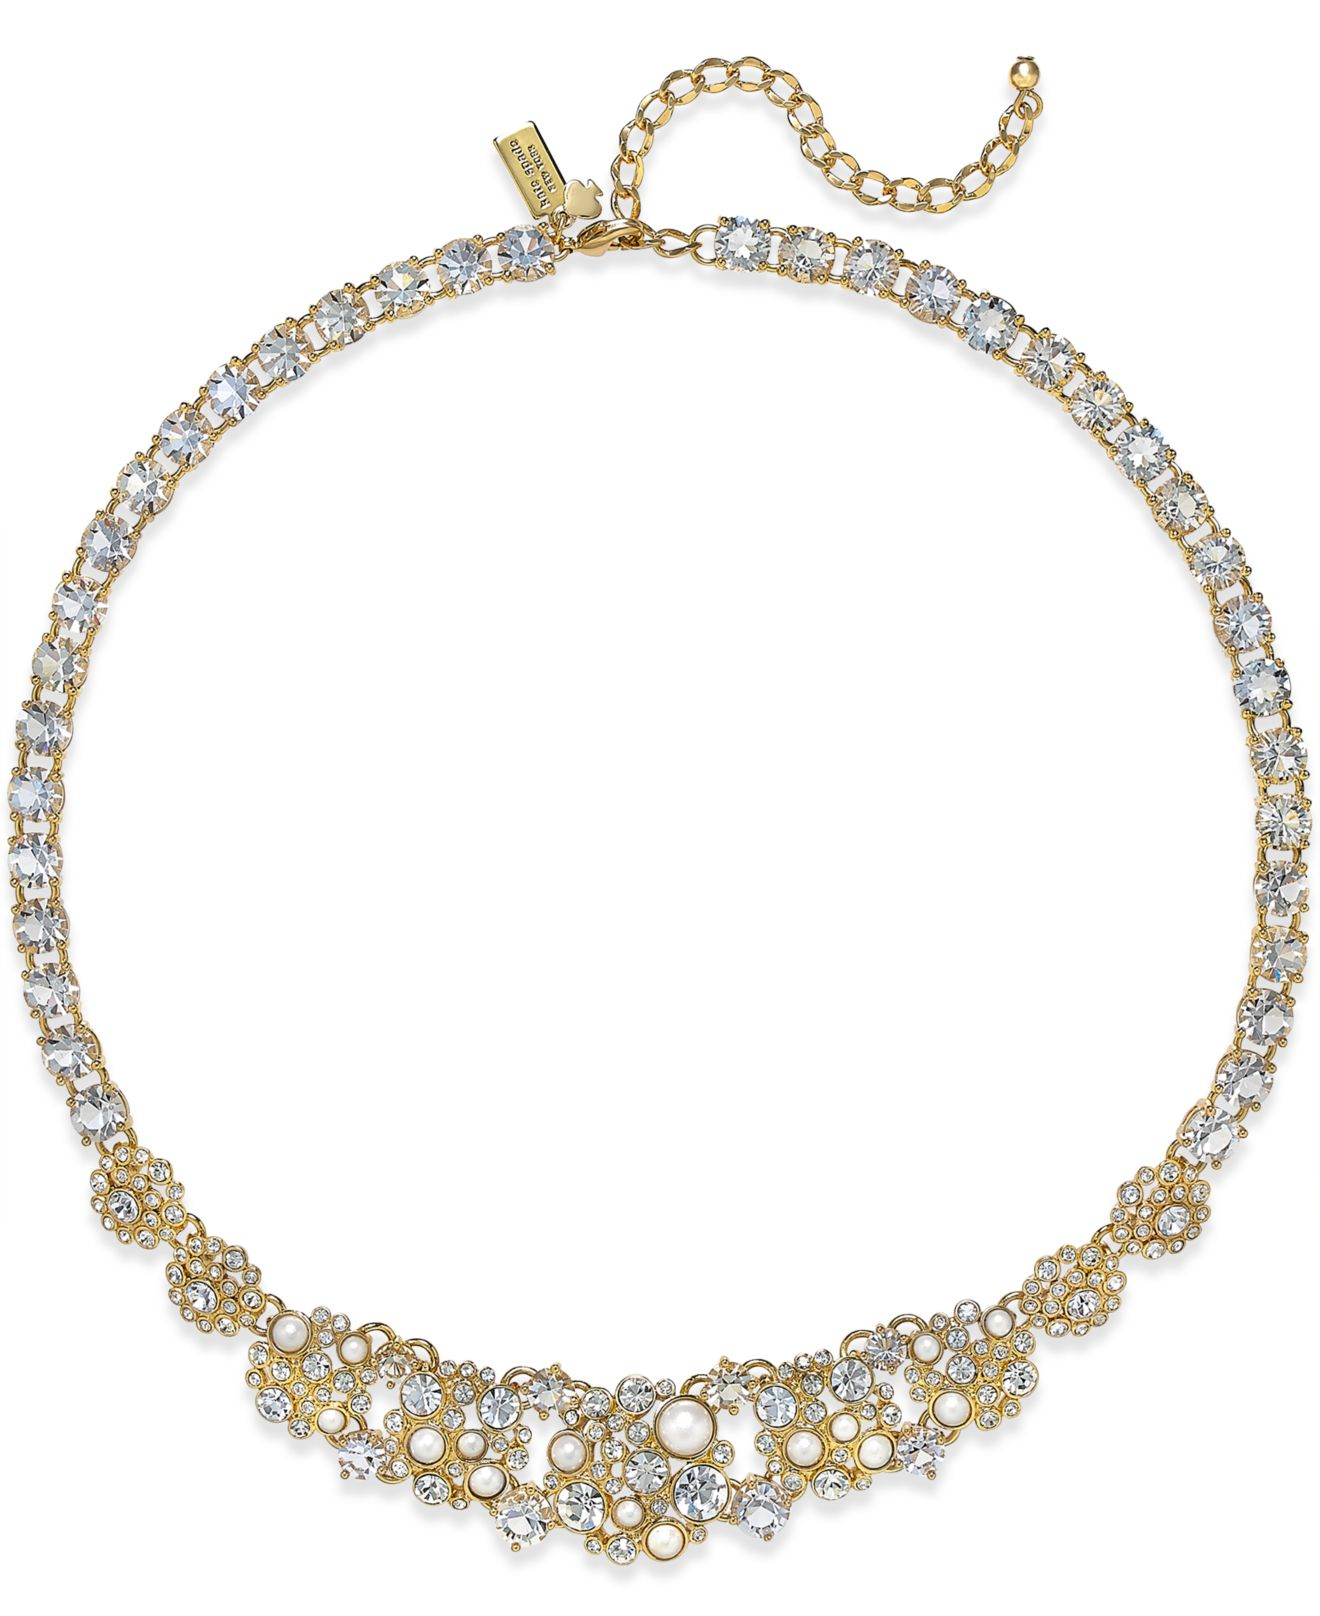 Lyst - Kate Spade New York 12k Gold-plated Crystal And Imitation Pearl ...